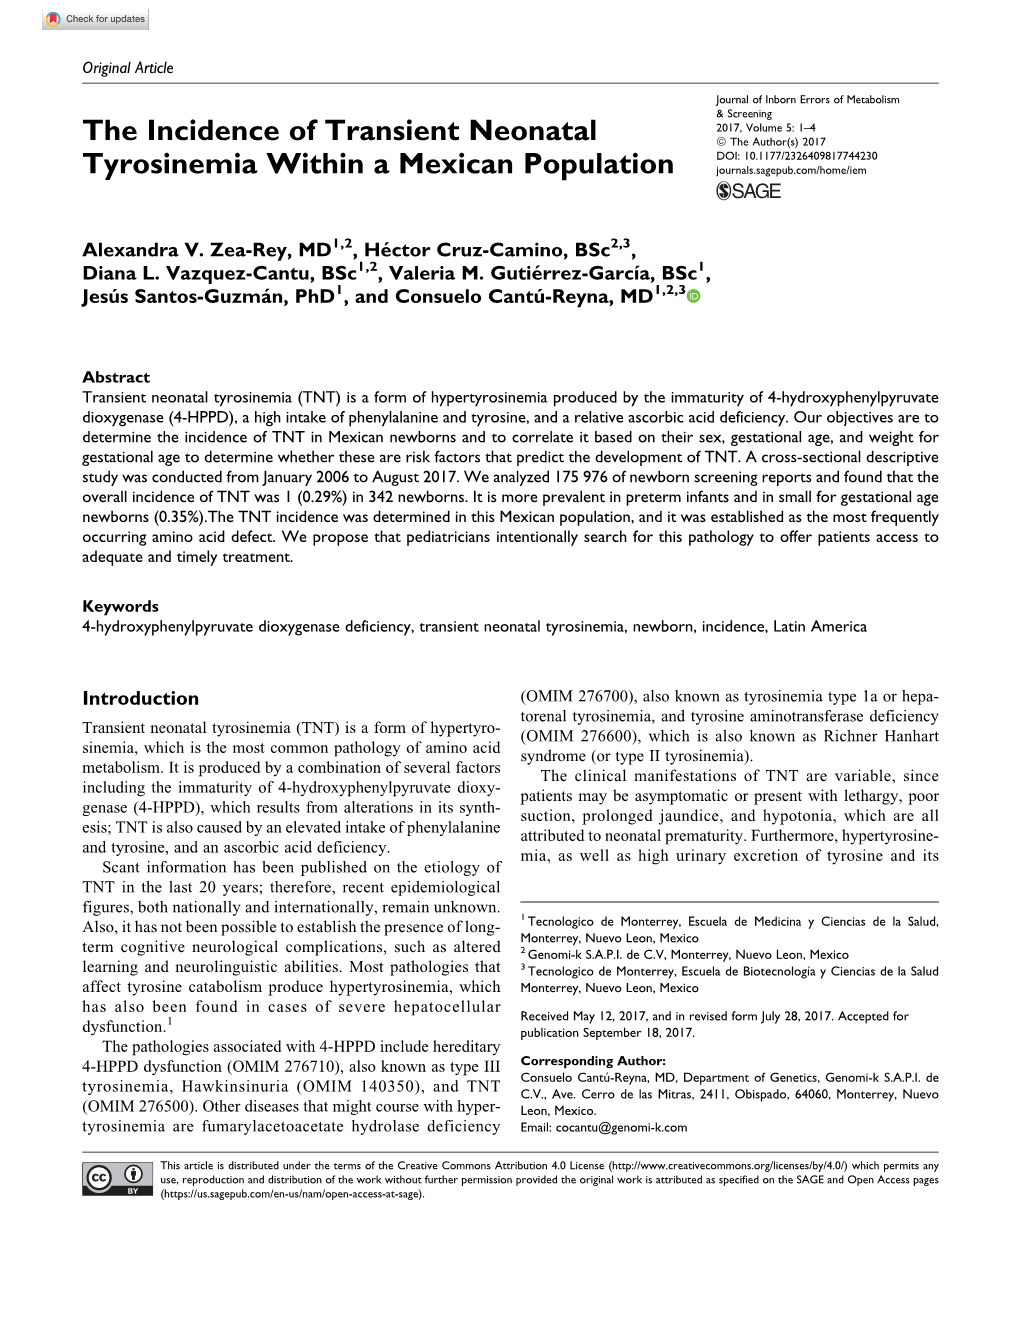 The Incidence of Transient Neonatal Tyrosinemia Within a Mexican